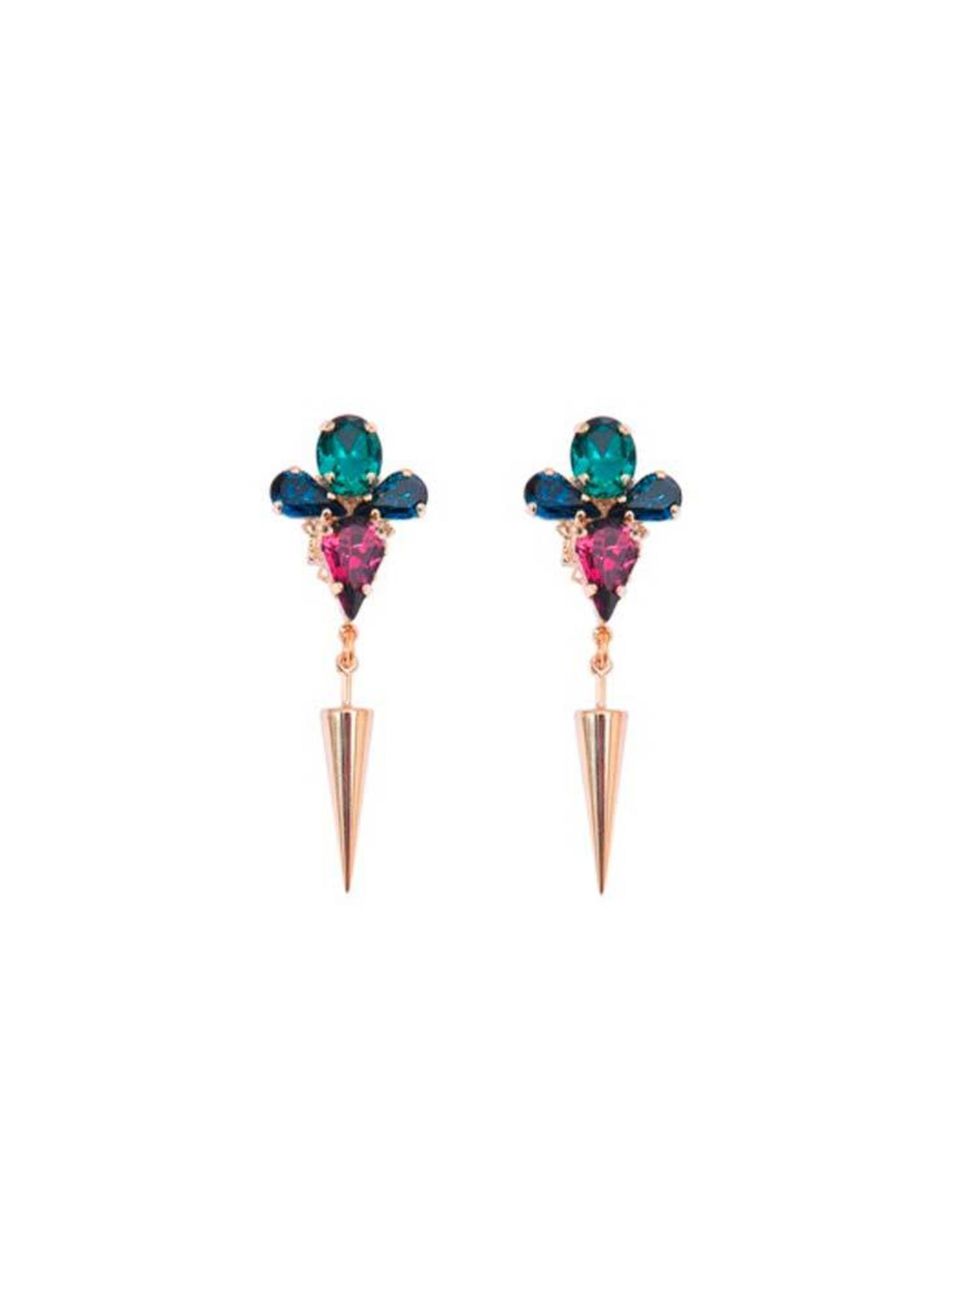 <p>Anton Heunis Multicolour earrings available at <a href="http://www.monnierfreres.co.uk/gbuk/jewellery-watches/earrings/spike-drop-cluster-earrings_p22137527.html">Monnier Frères</a>, £80</p>